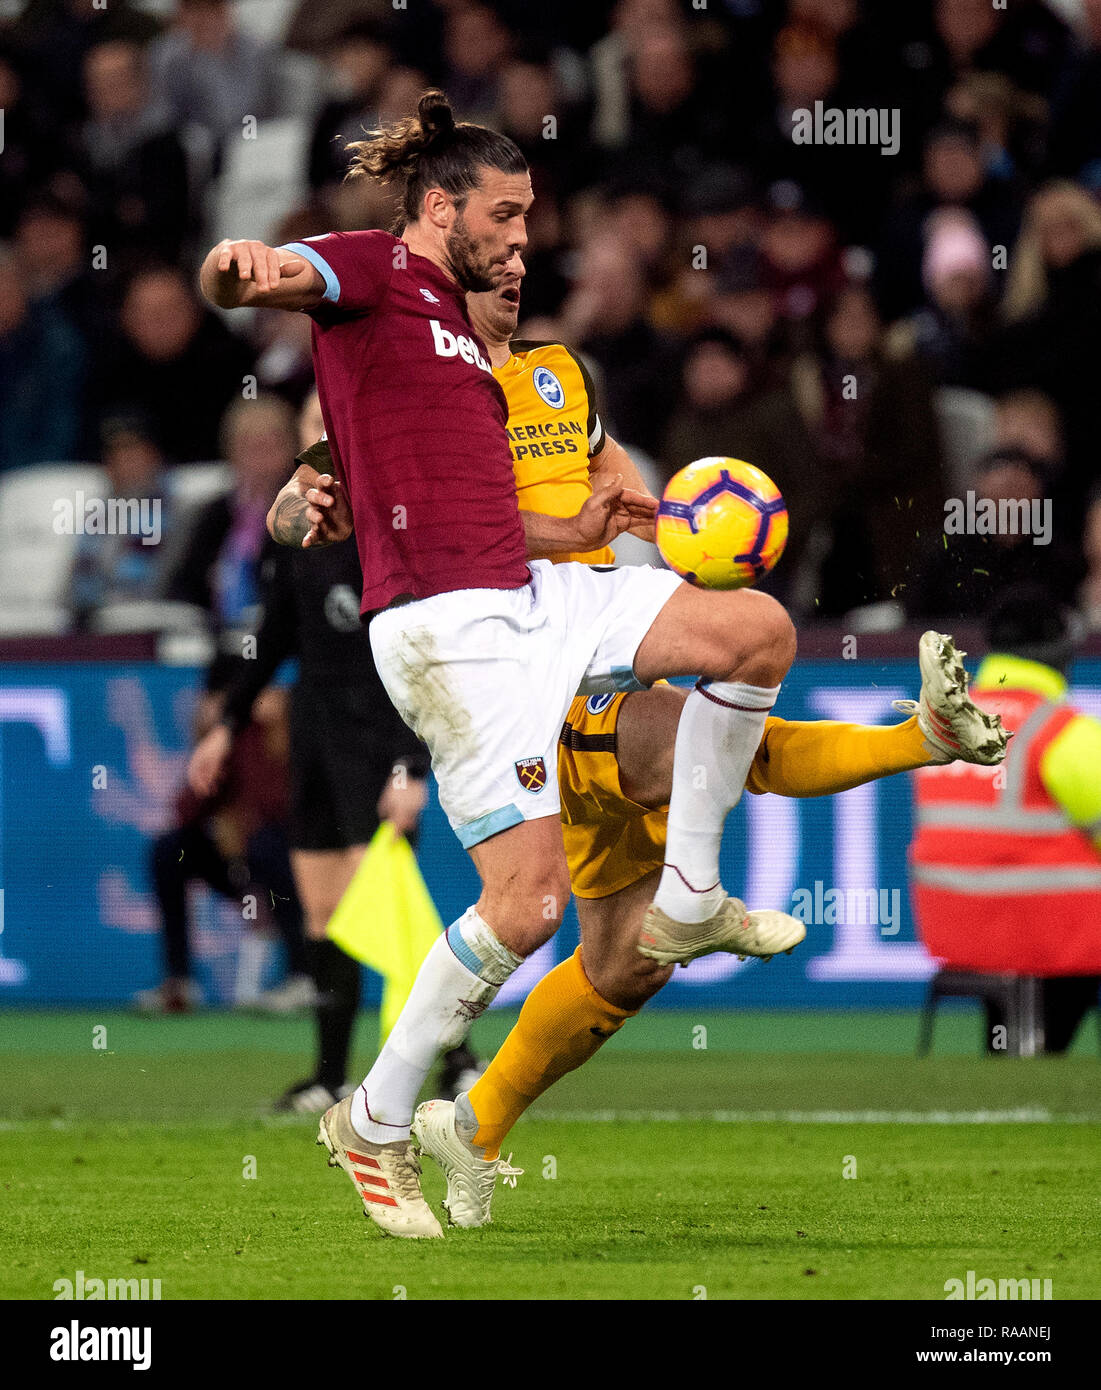 West Ham United's Andy Carroll (left) and Brighton & Hove Albion's Lewis Dunk battle for the ball during the Premier League match at the London Stadium. Stock Photo